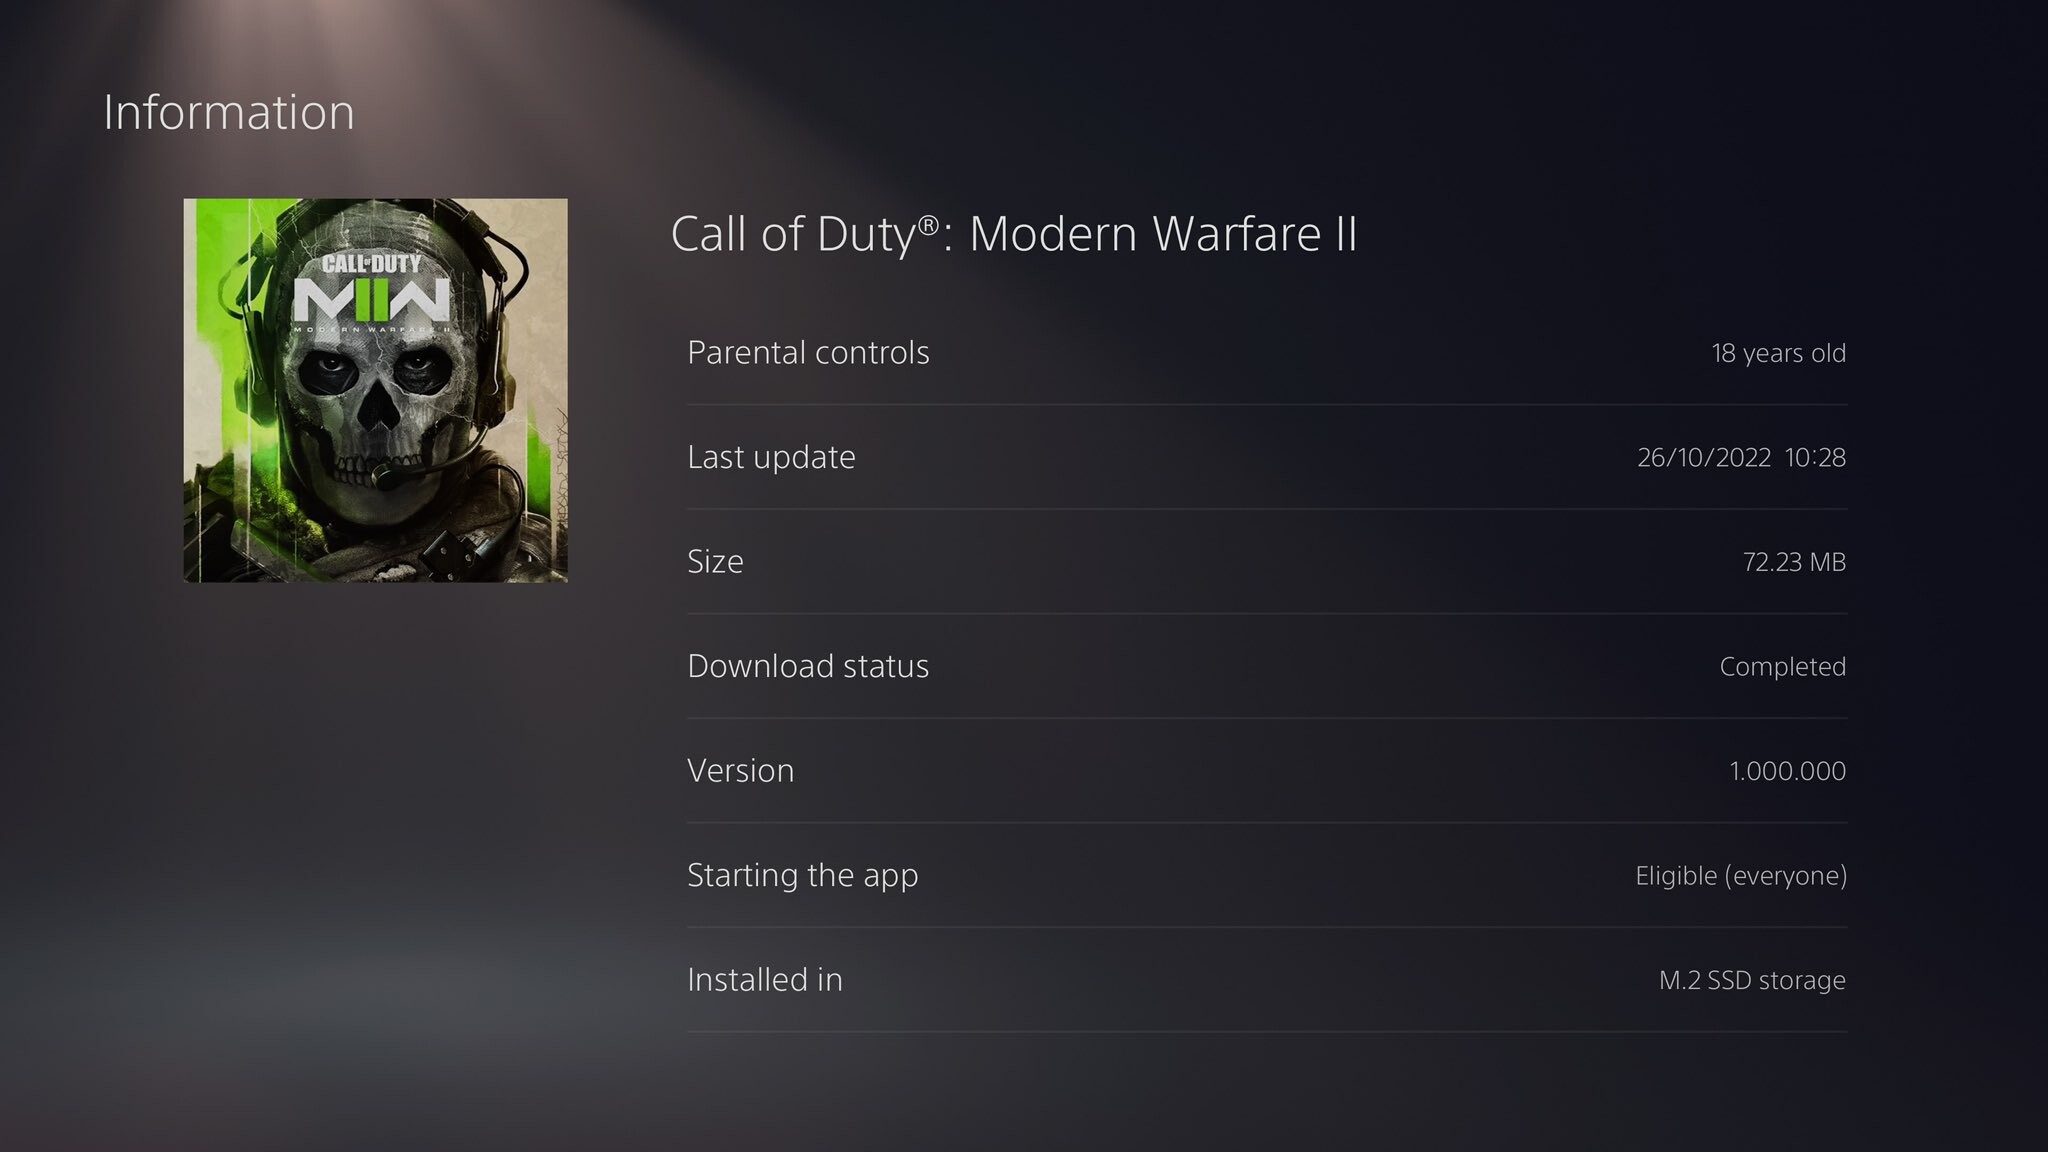 Call of Duty: Modern Warfare II Disc Version Doesn't Actually Have the Game  on it, Serves as Hardware DRM